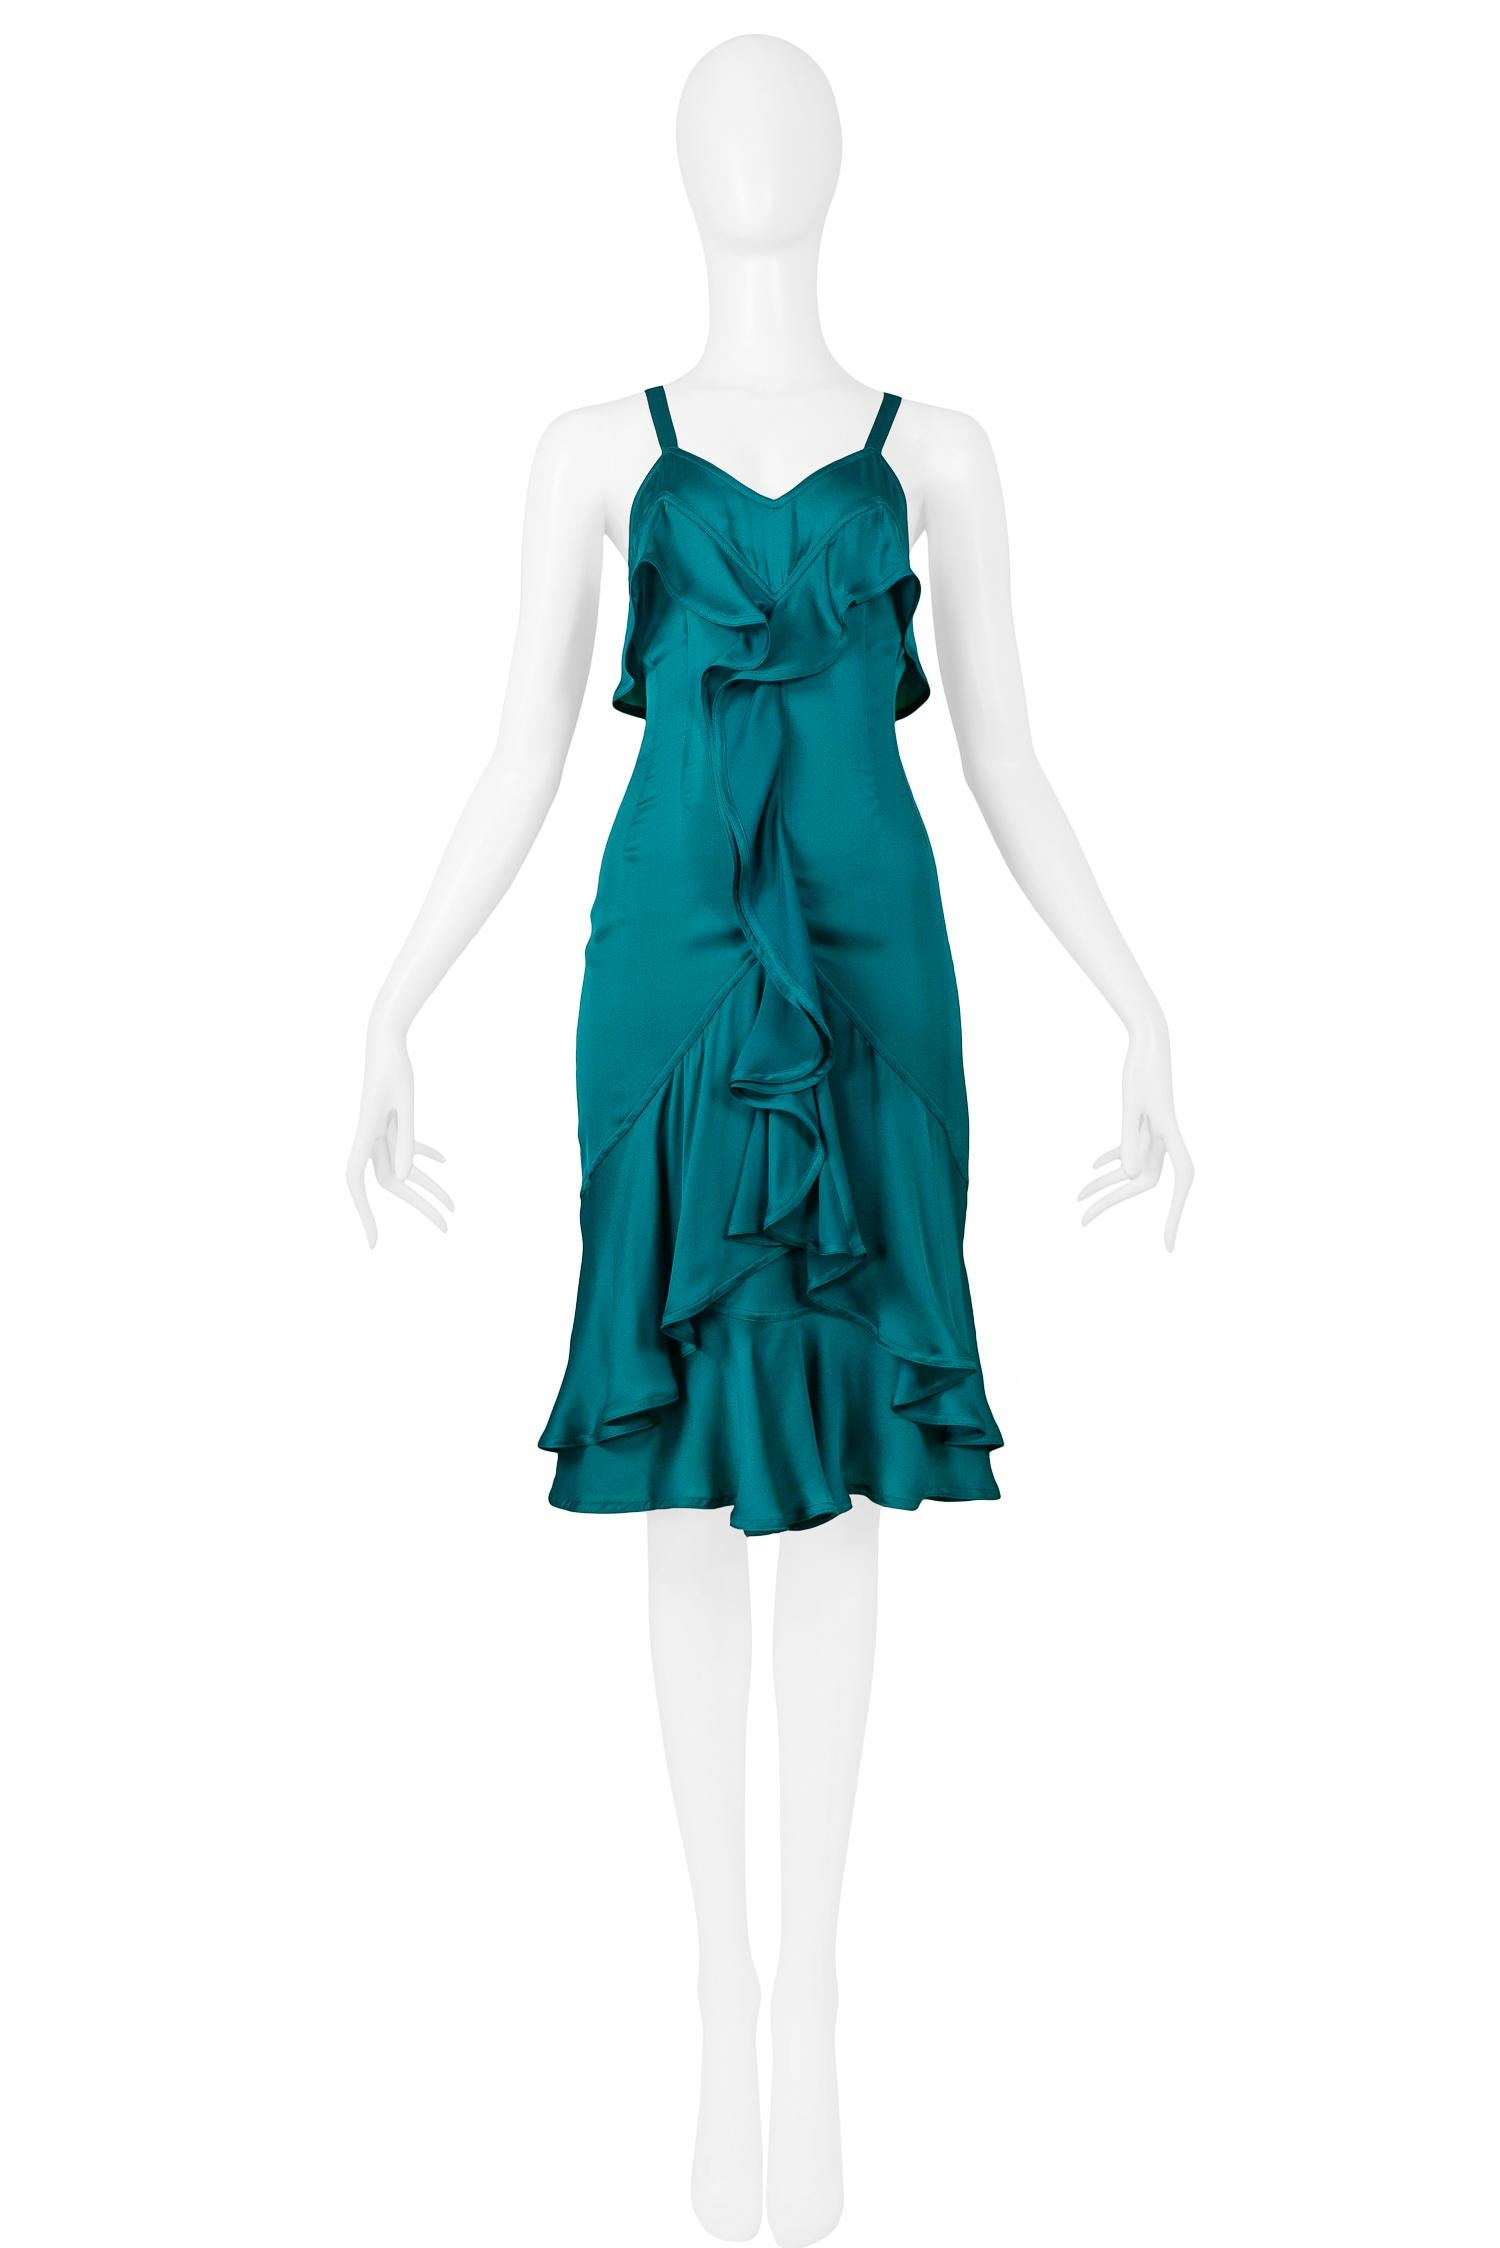 We are excited to offer a vintage Tom Ford for Yves Saint Laurent green silk jersey sleeveless slip dress featuring ruffle panels at bust, torso, hem, and back, and center back zipper. 

Gucci
Designed by Tom Ford
Size Small
Measured flat not